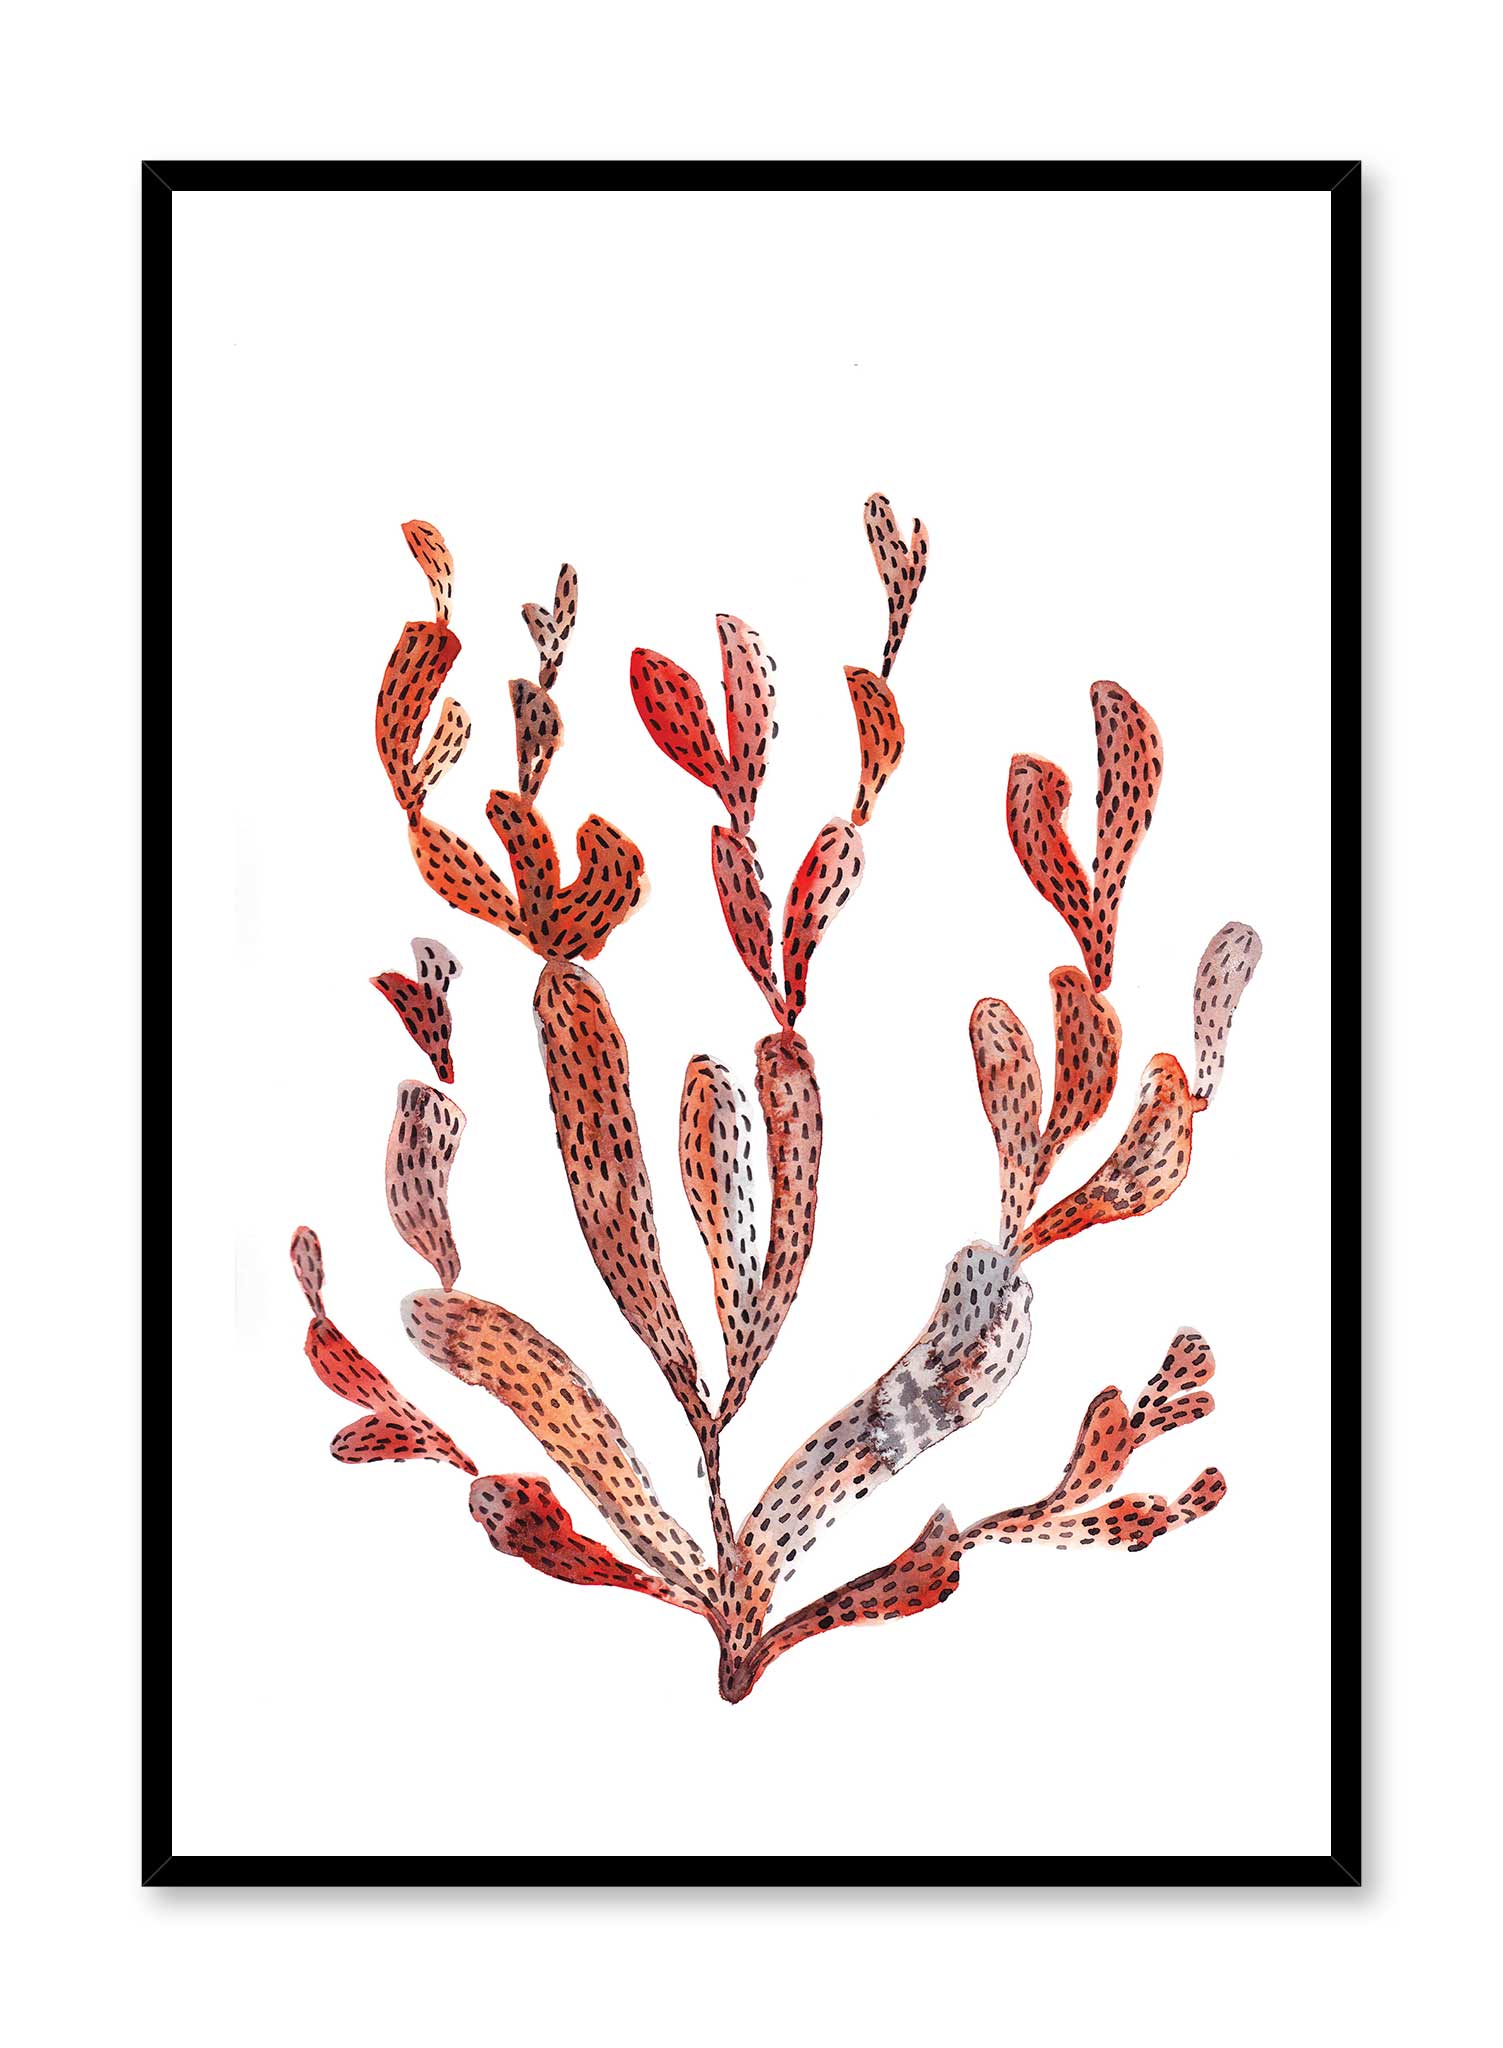 Crimson Coral is a minimalist illustration of a strand of crimson-coloured branch of coral by Opposite Wall.